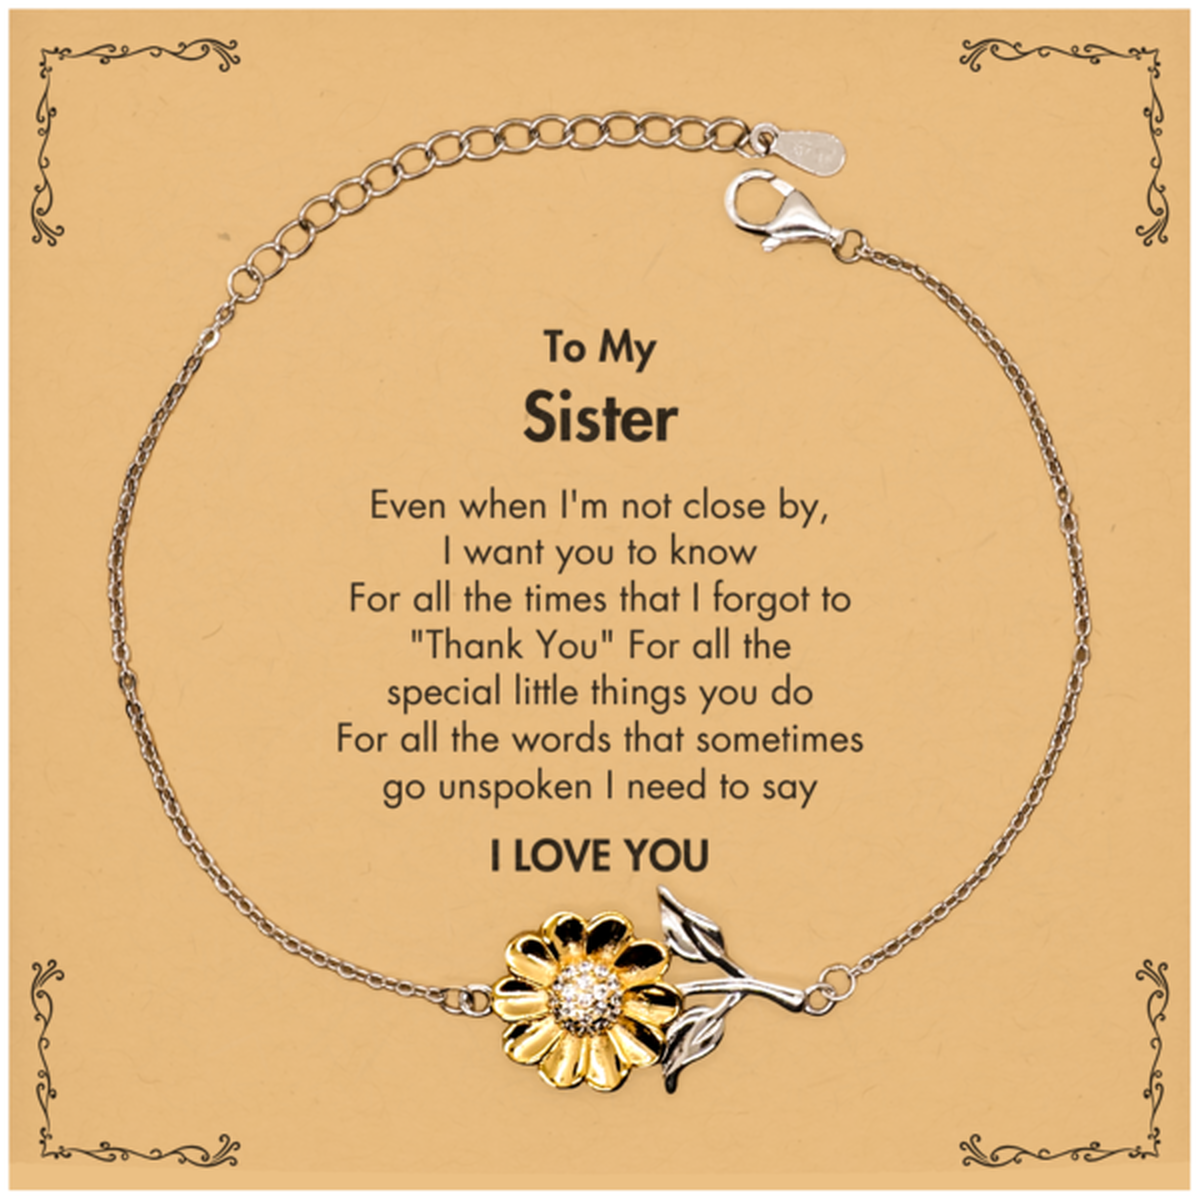 Thank You Gifts for Sister, Keepsake Sunflower Bracelet Gifts for Sister Birthday Mother's day Father's Day Sister For all the words That sometimes go unspoken I need to say I LOVE YOU